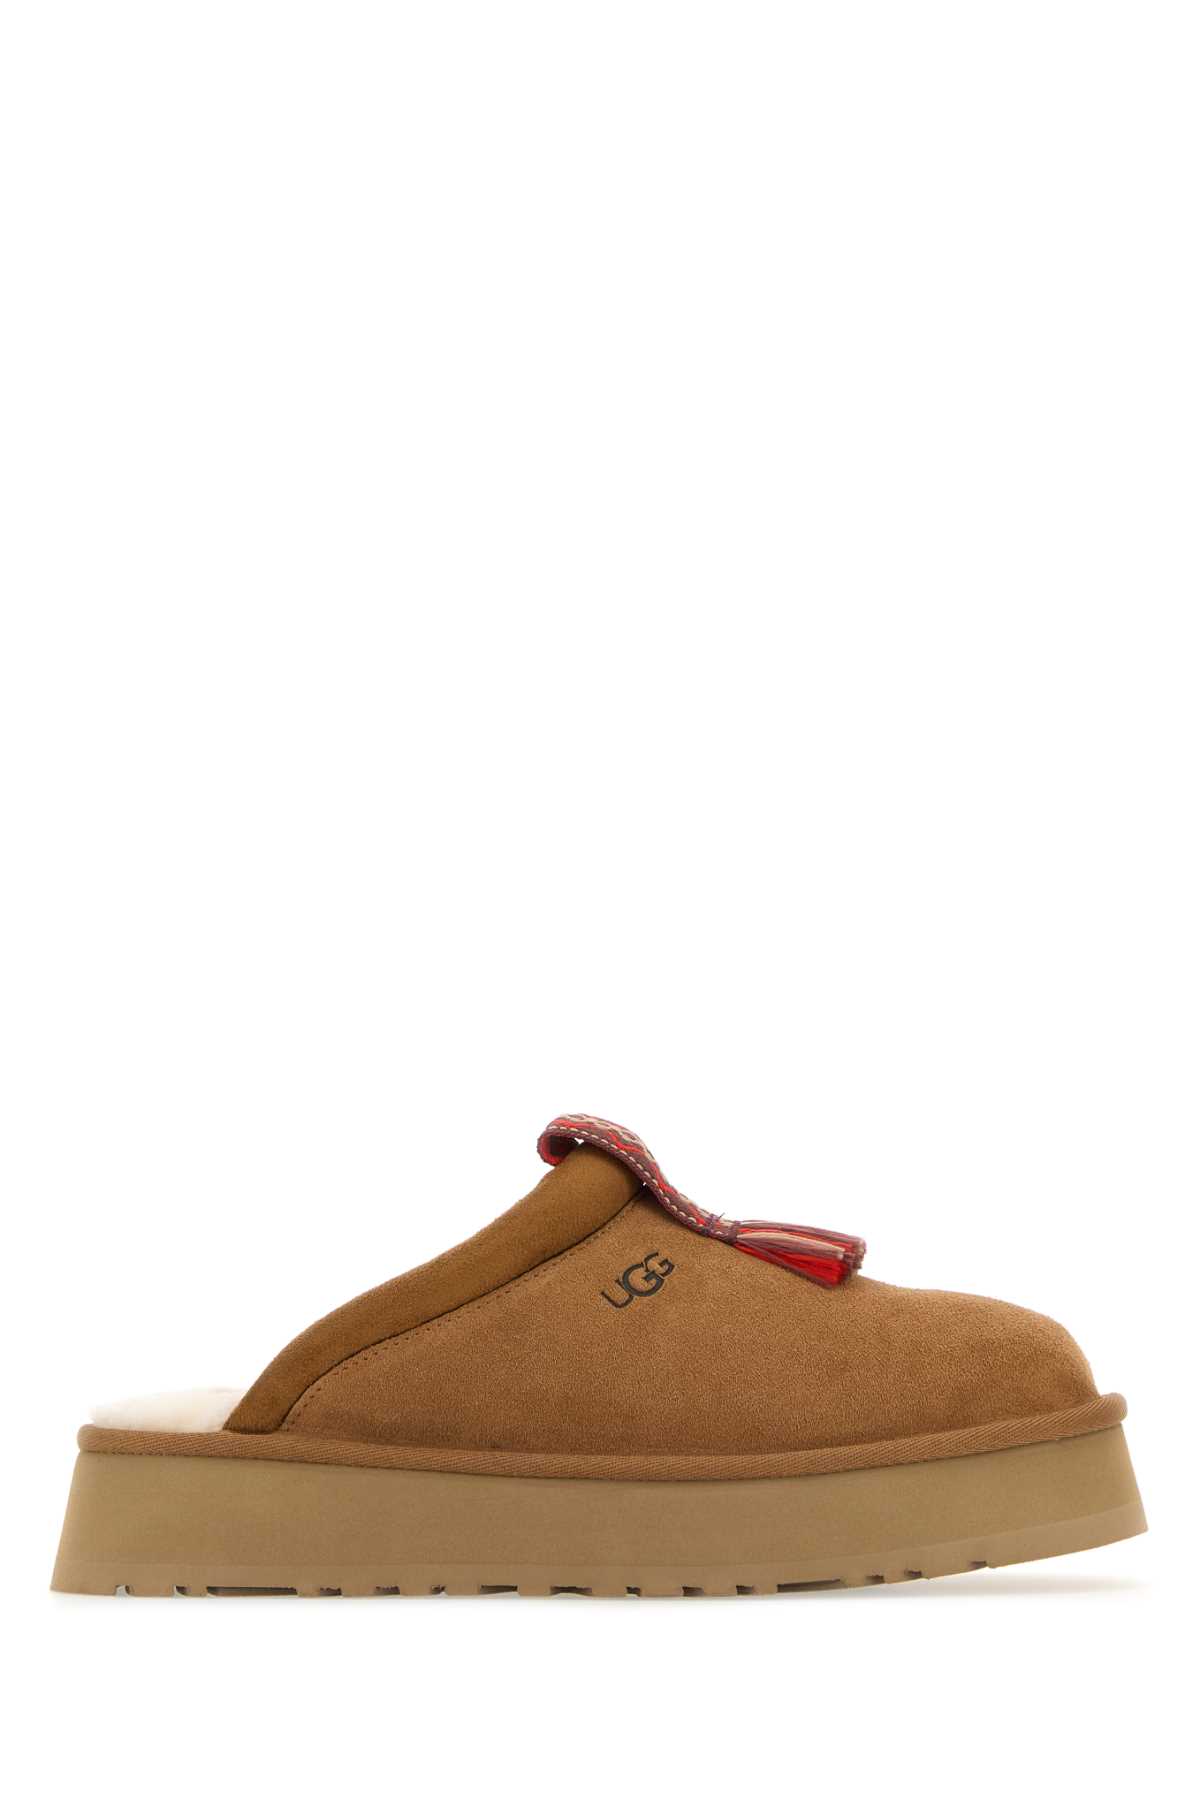 Camel Suede Tazzle Slippers